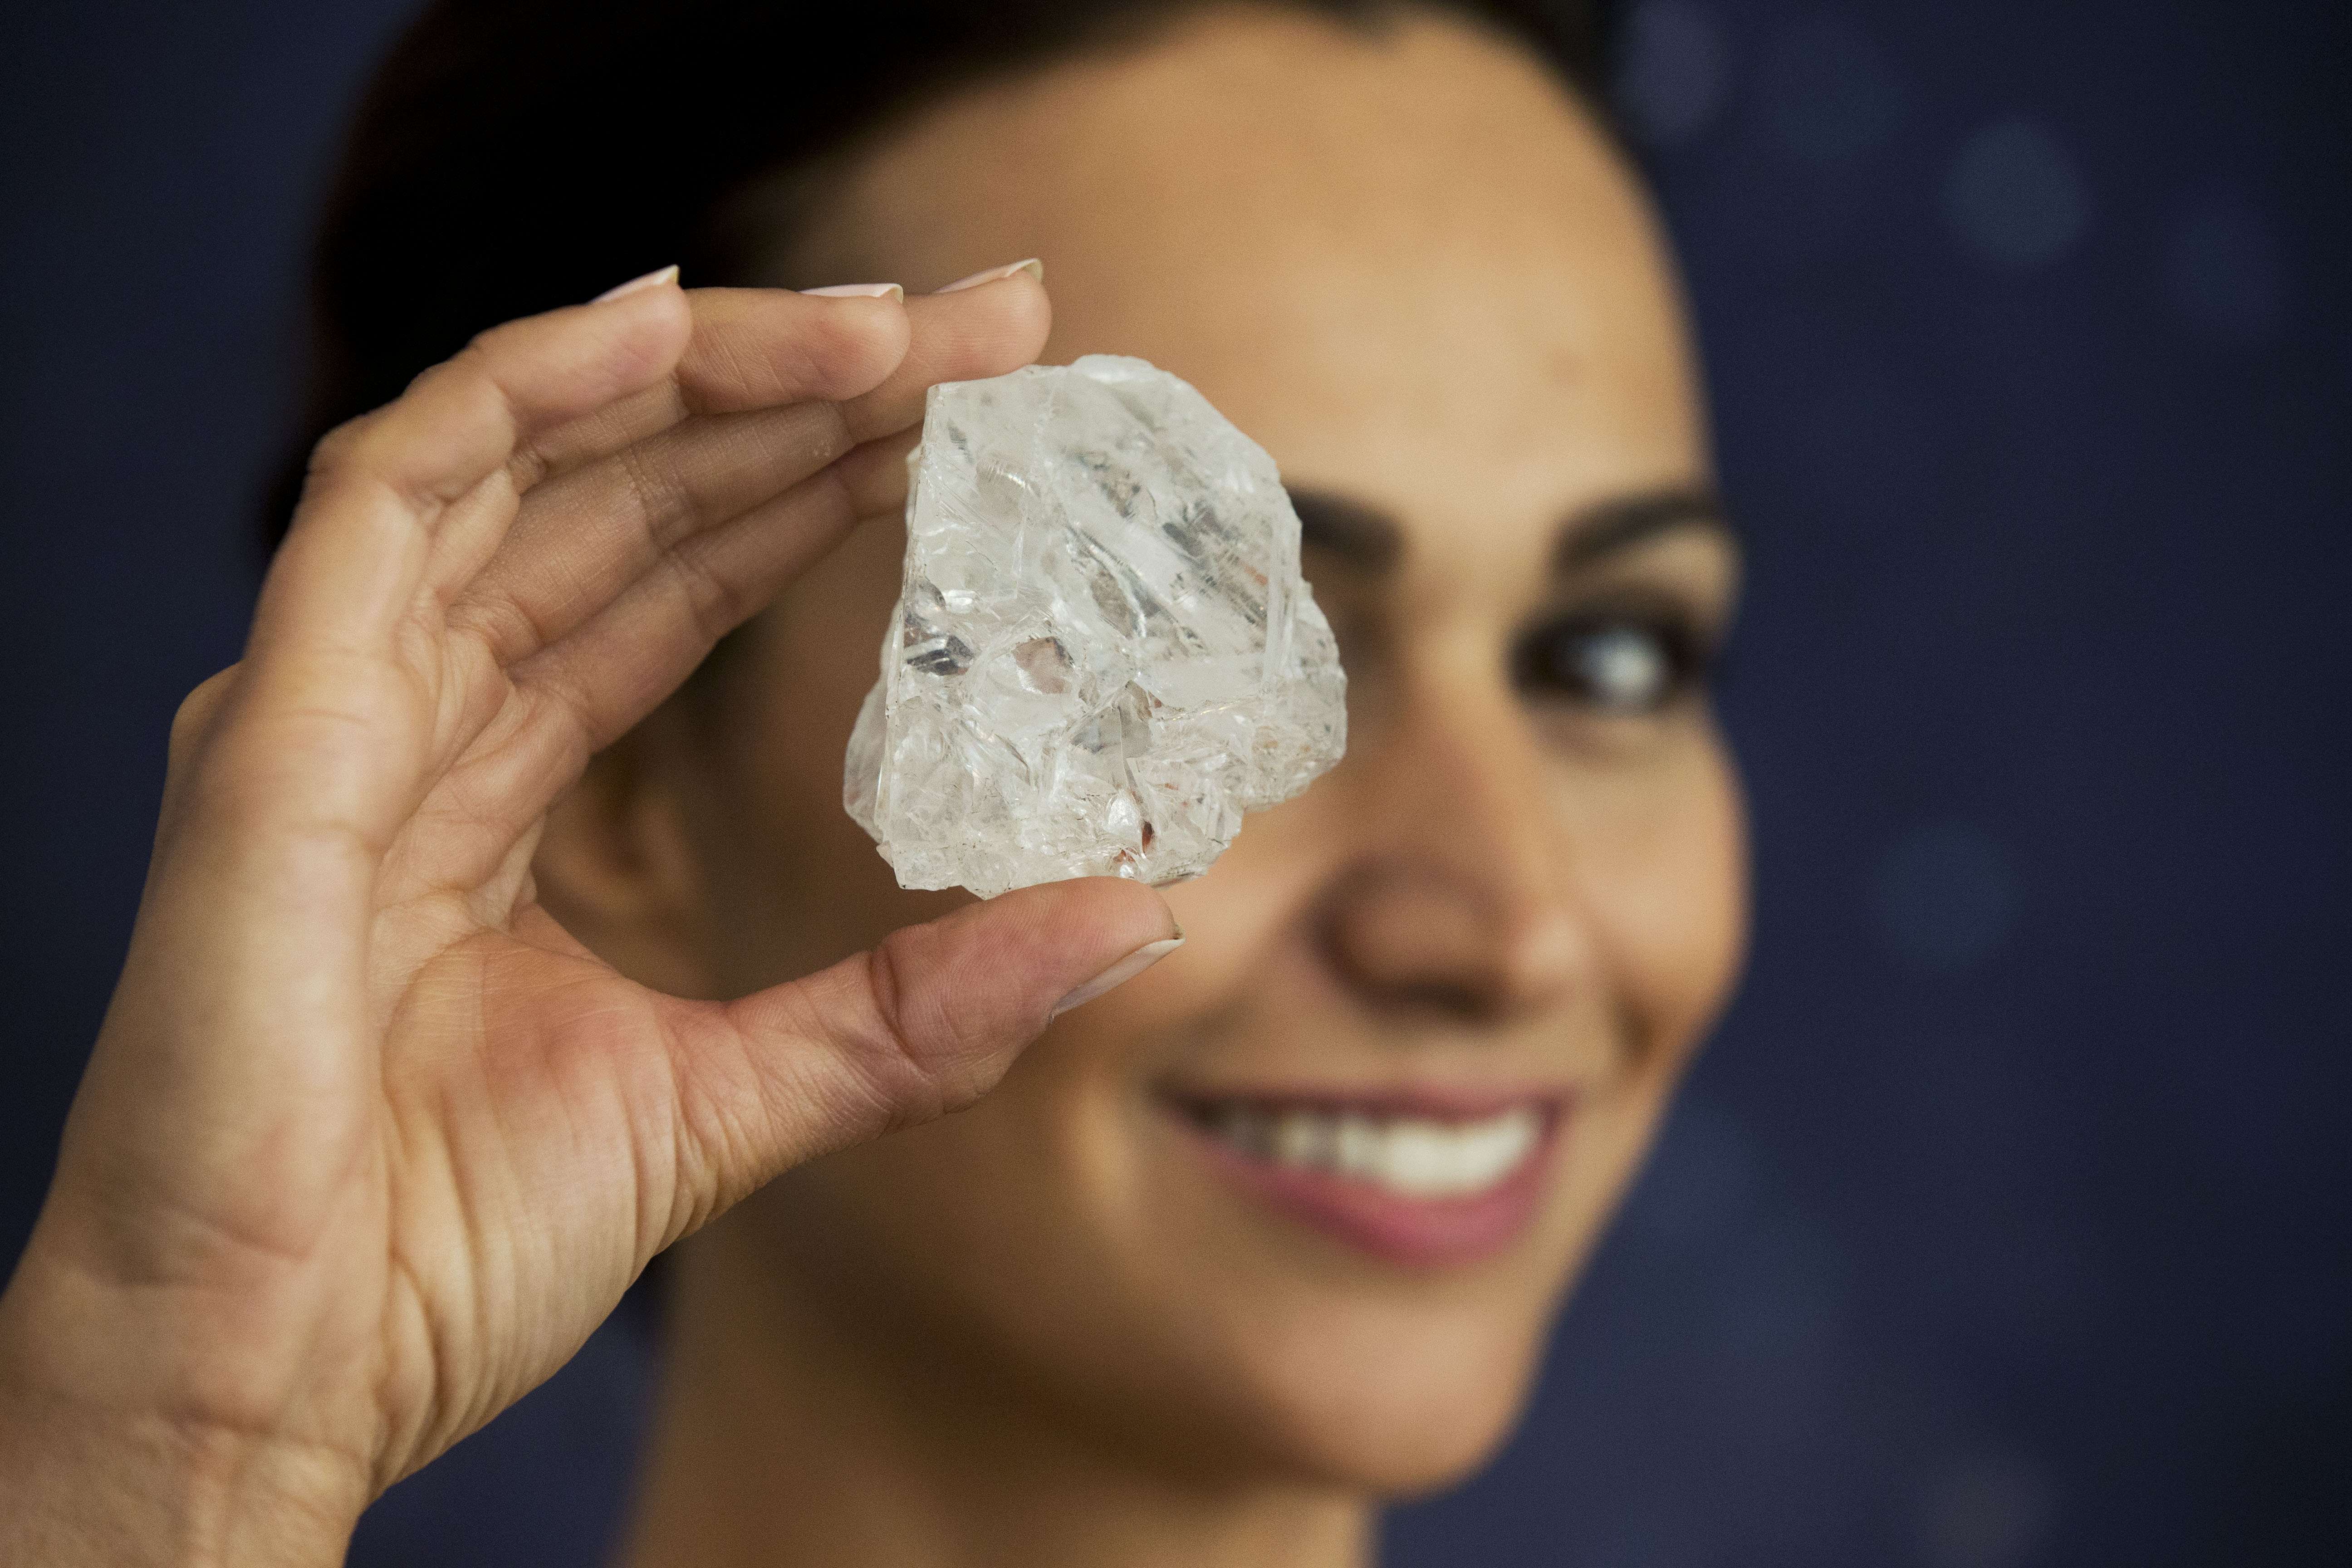 Massive diamond the size of a tennis ball could fetch $70 million